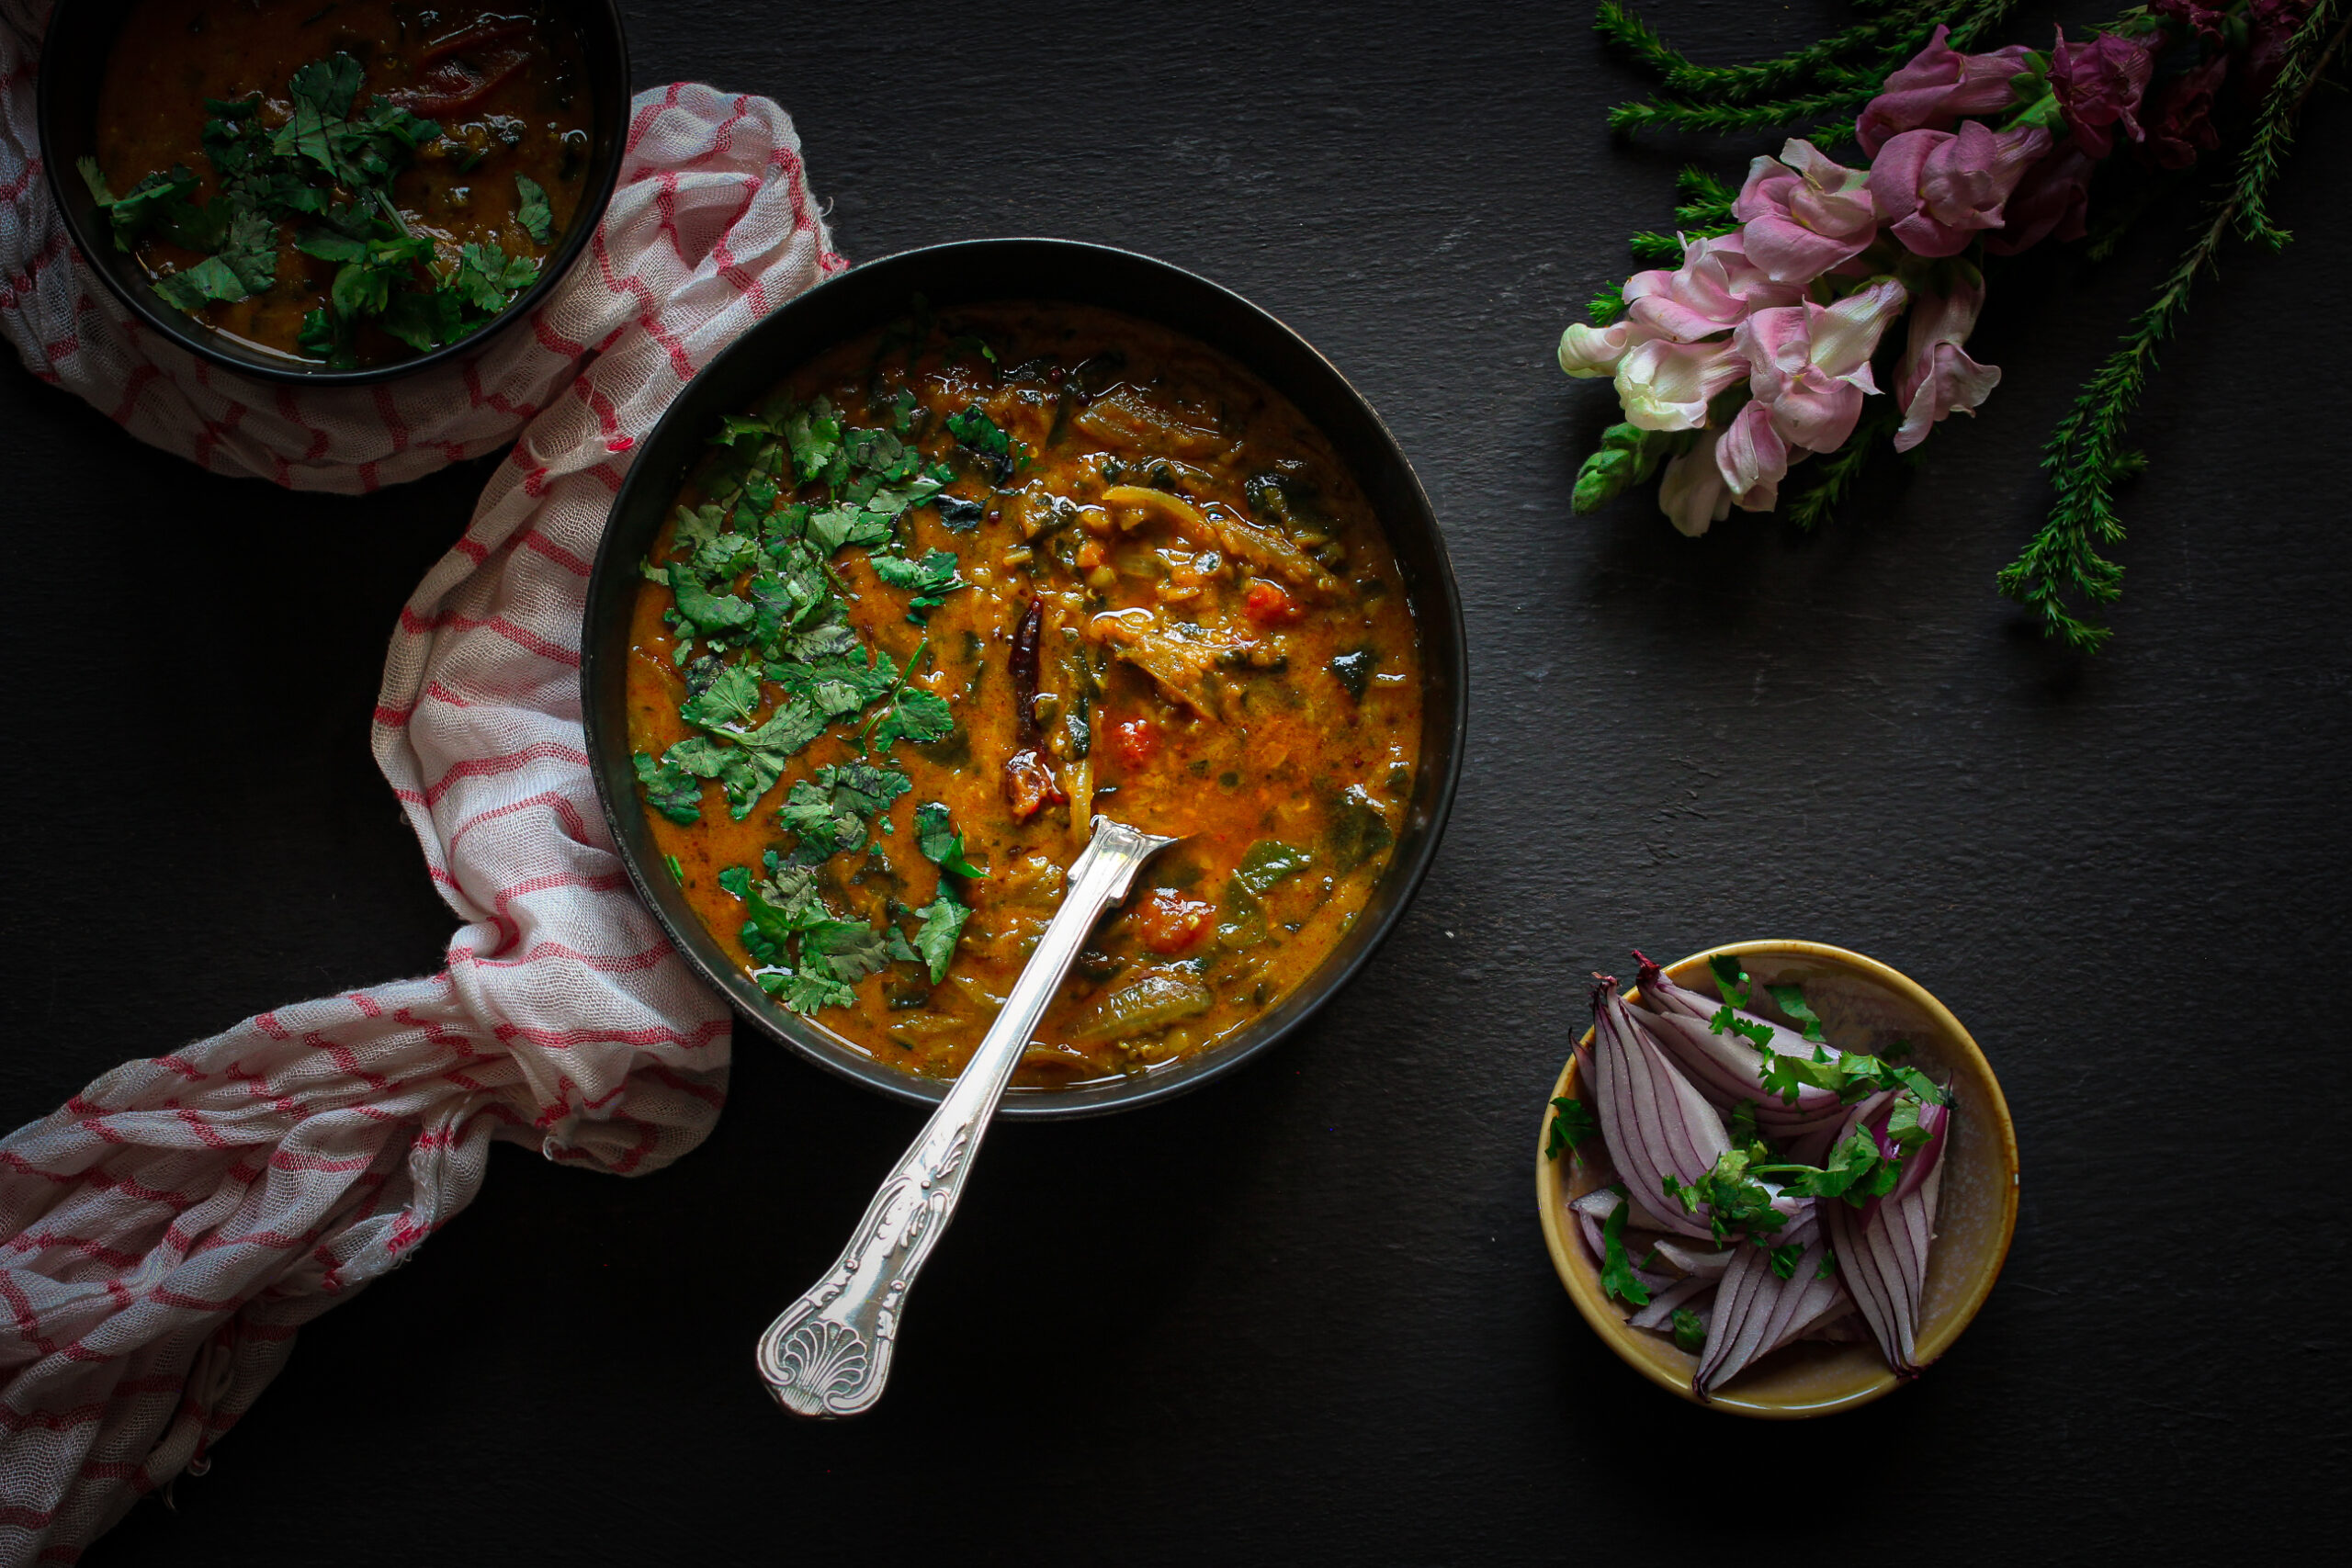 Spinach and Dhal Makhani – Good old Indian comfort food